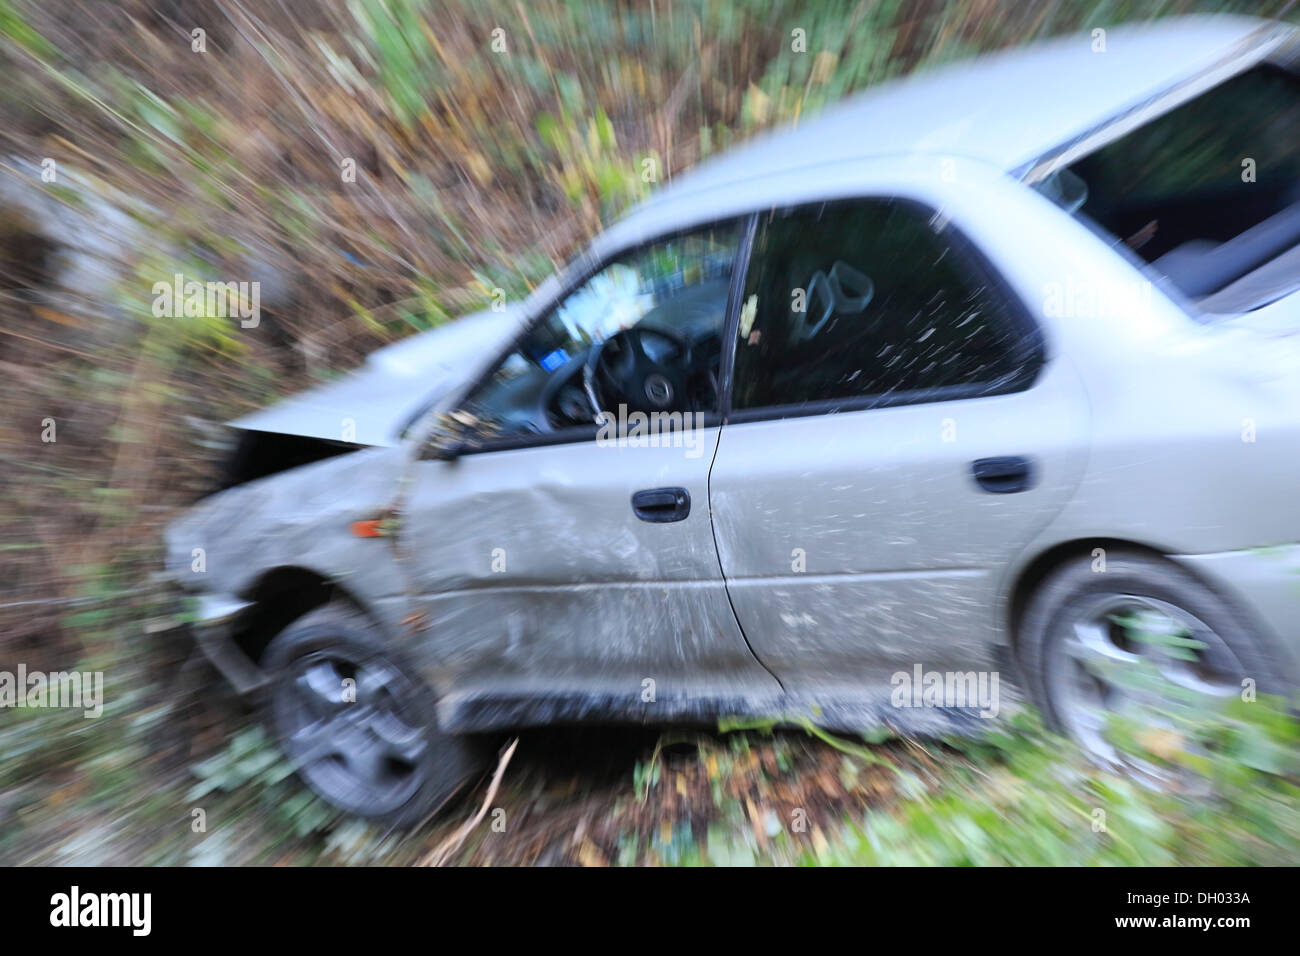 Car which has driven off the road and down an embankment, traffic accident Stock Photo